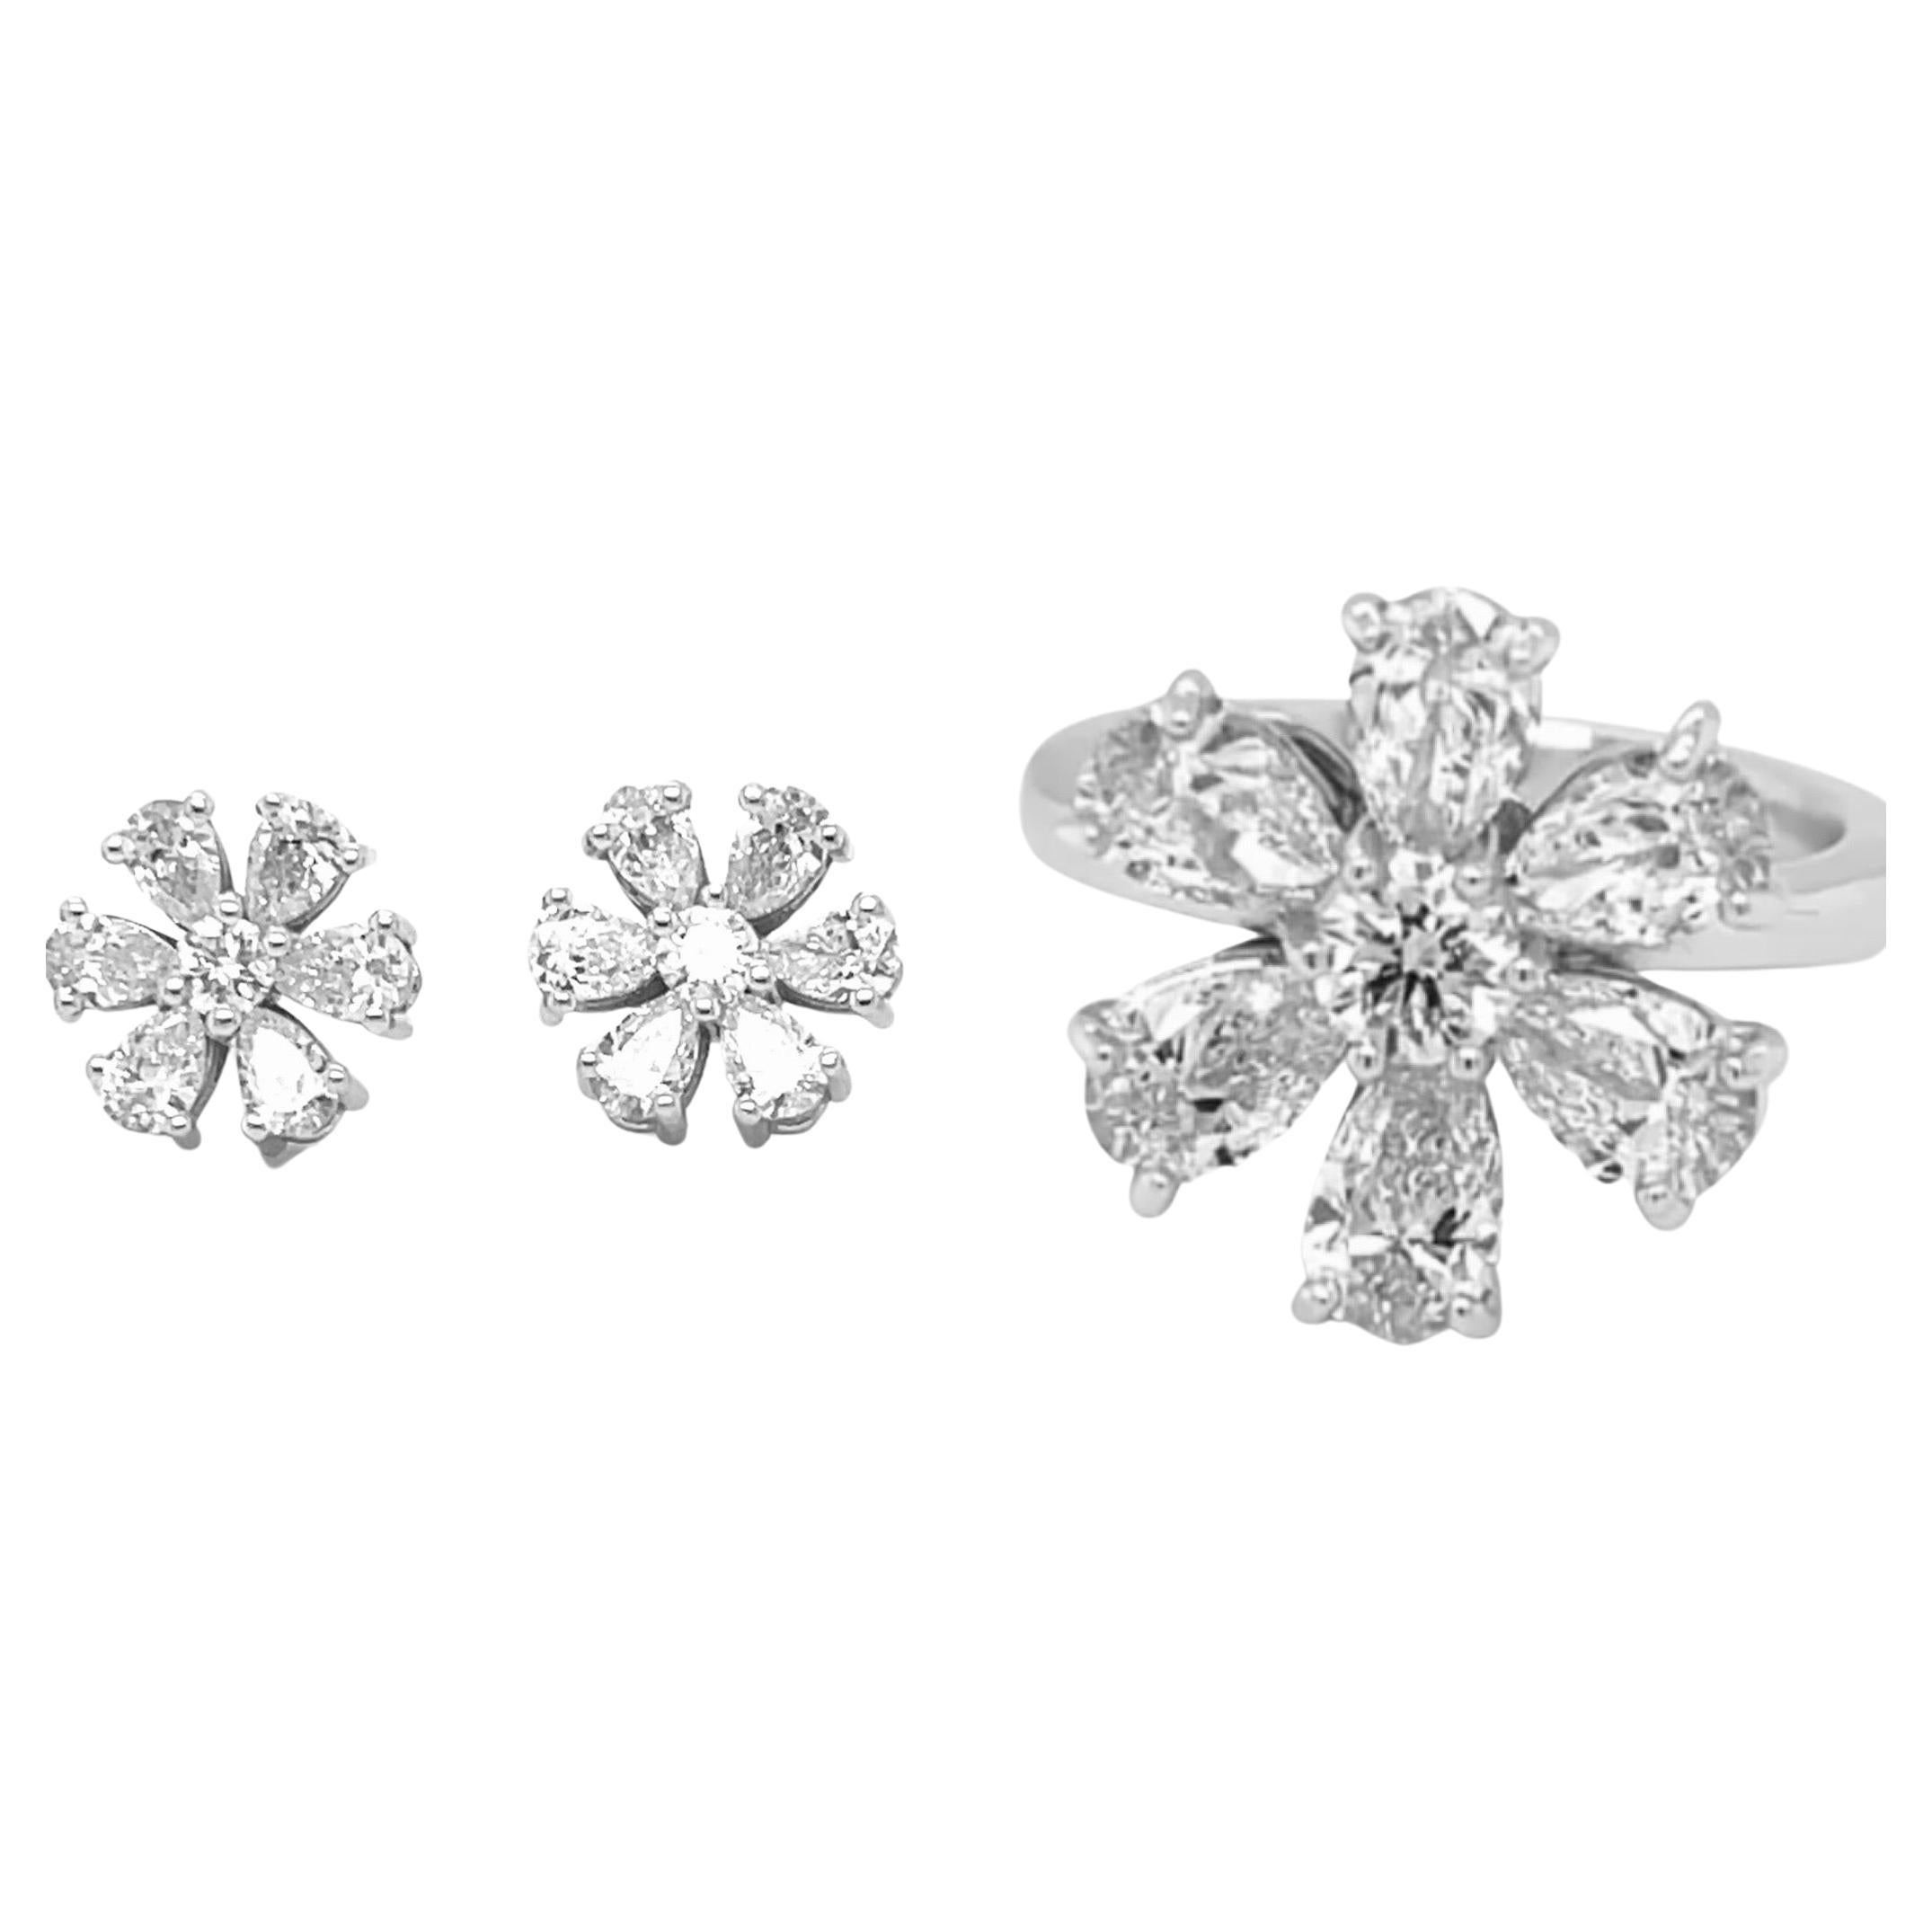 Diamond Pear Shape and Round Flower Ring and Earrings Set 4.12 Carats GIA For Sale